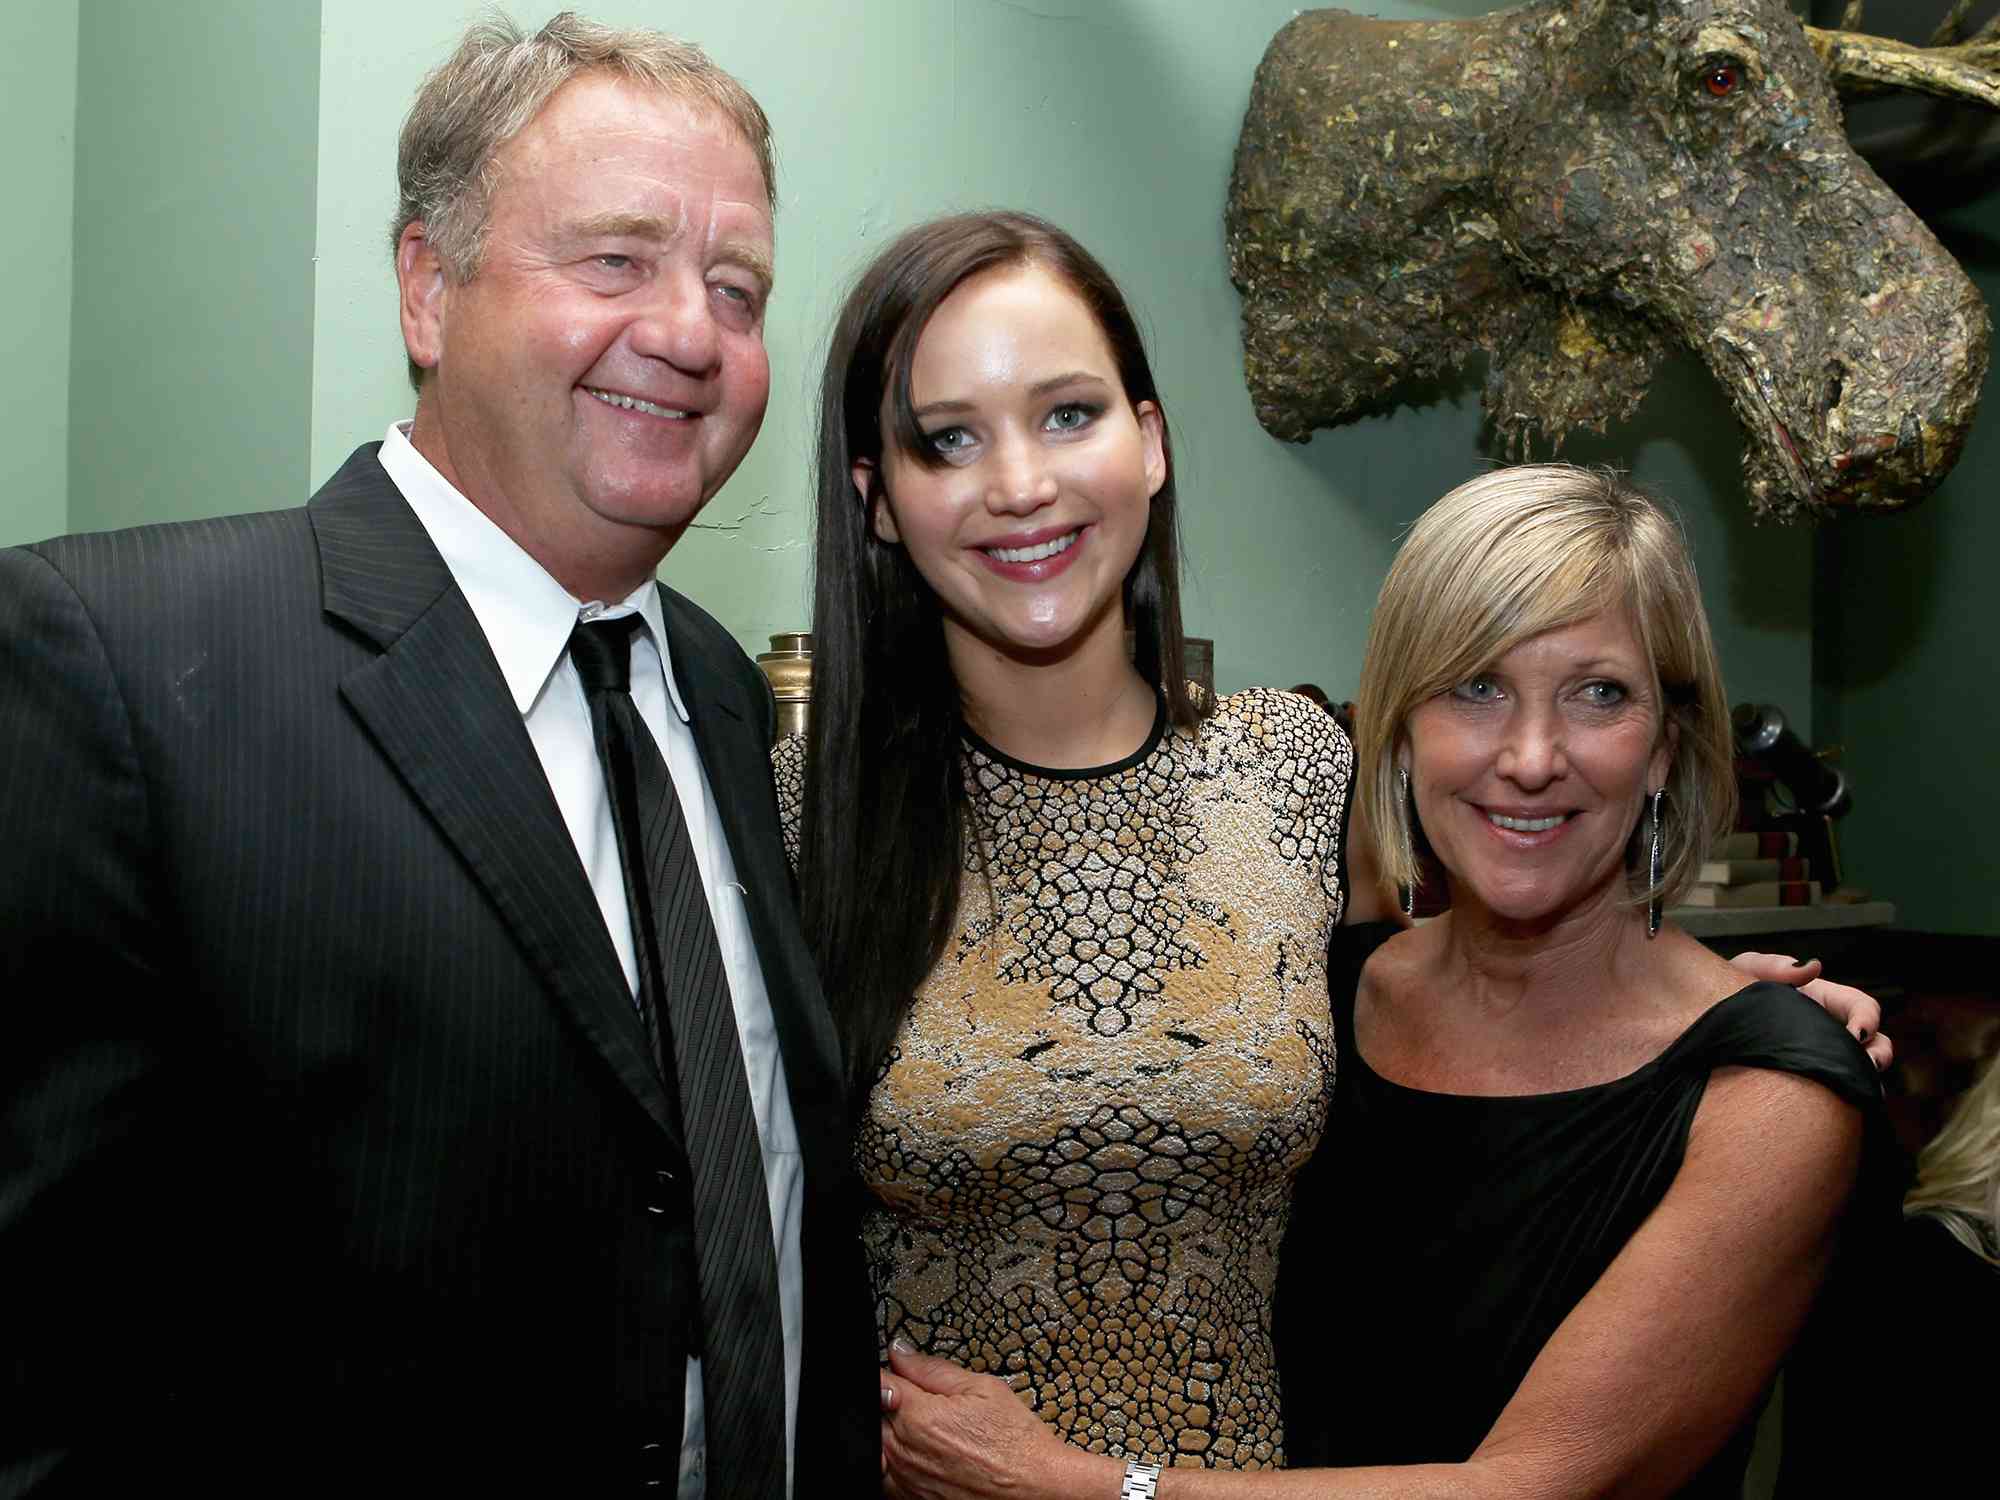 Gary Lawrence, Jennifer Lawrence, and Karen Lawrence at The Weinstein Company film premiere party for 'Silver Linings Playbook' in 2012.